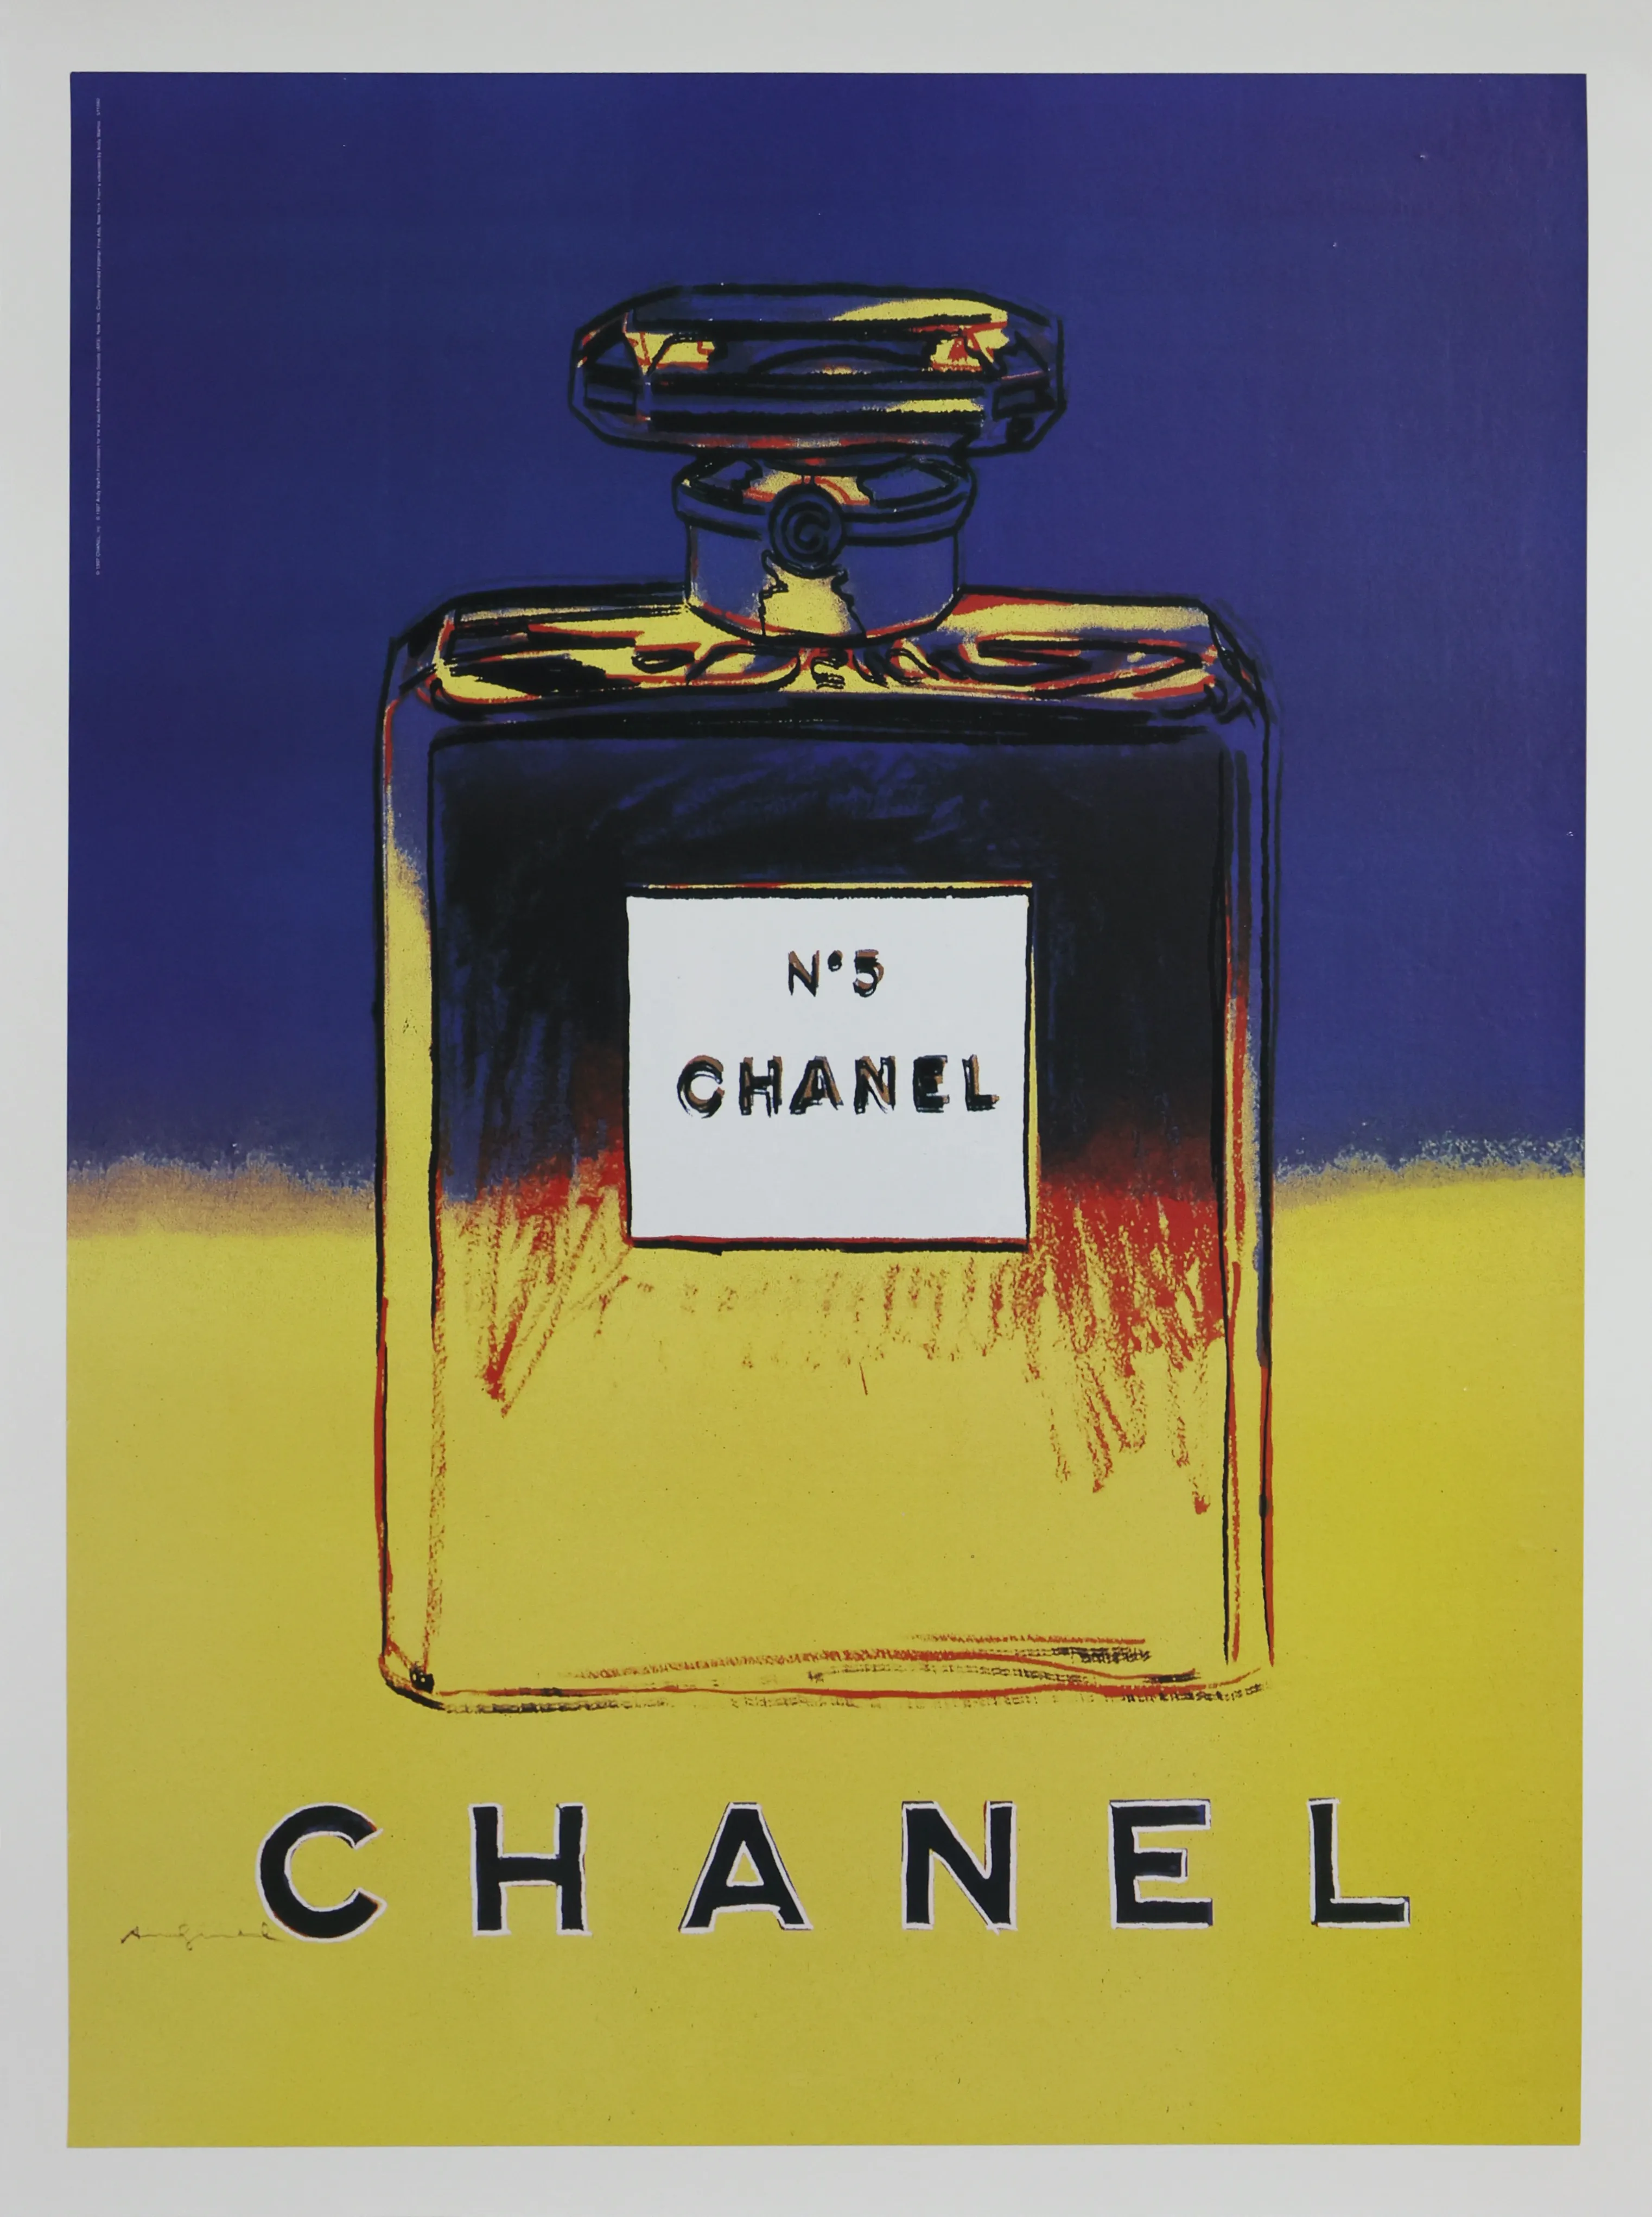 Andy Warhol - Chanel No. 5 (Suite of Four Posters)